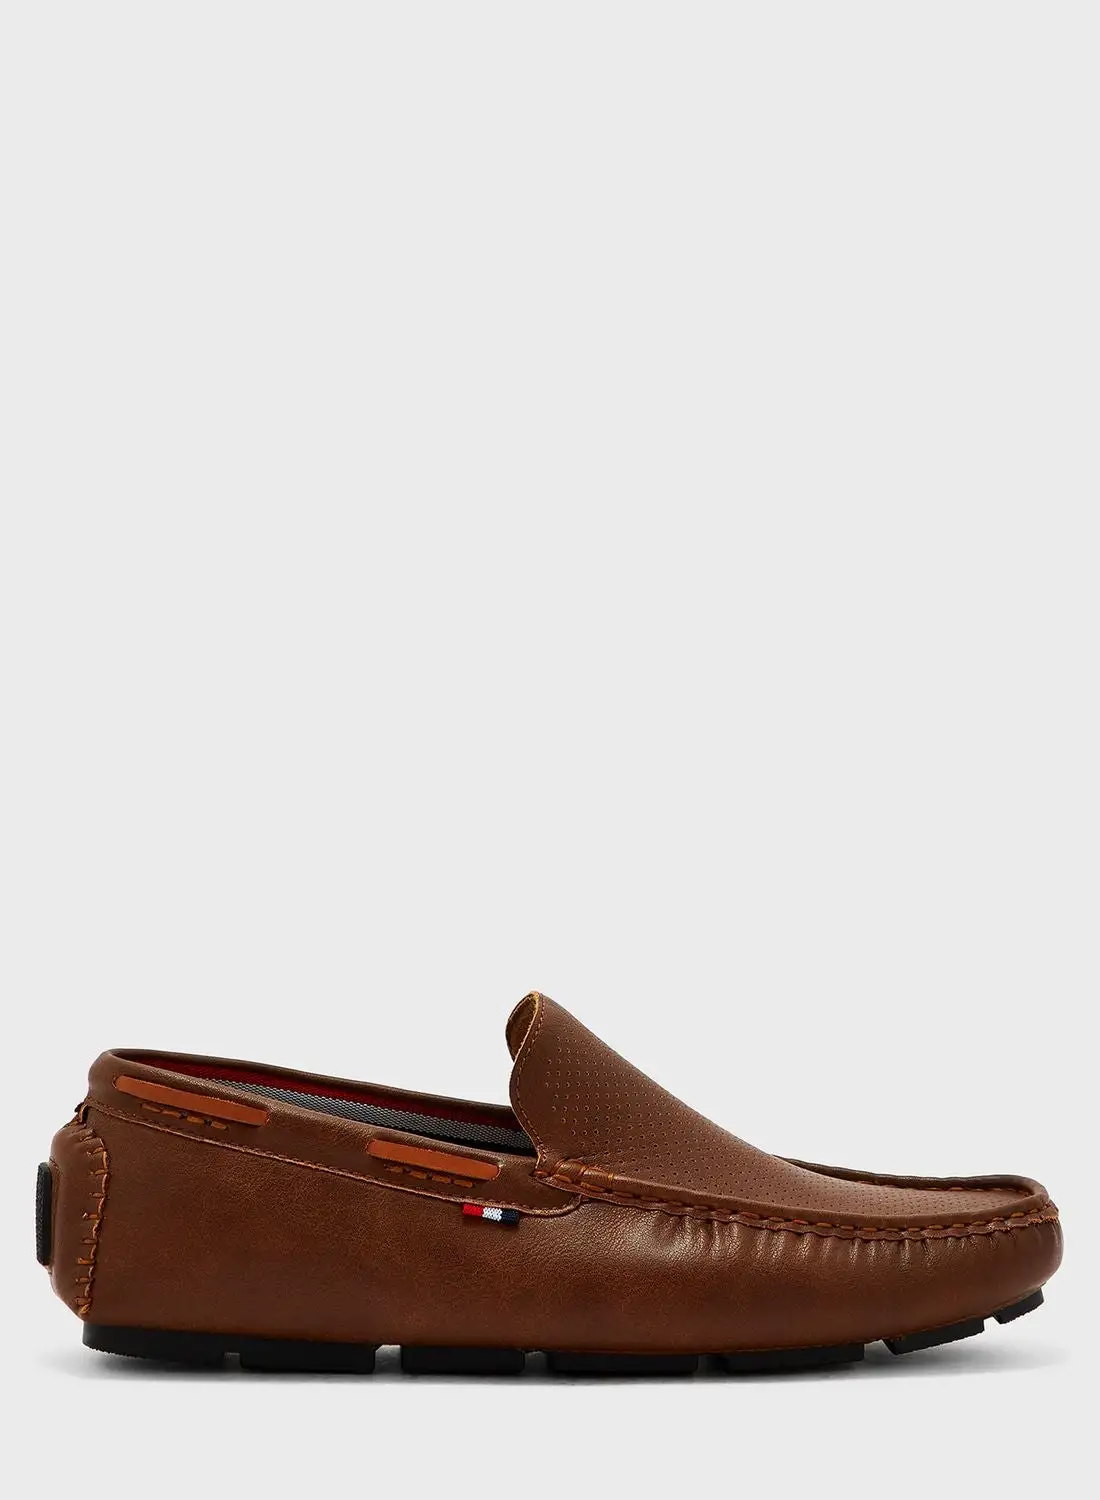 Robert Wood Webbing Highlight Perforation Texture Loafers